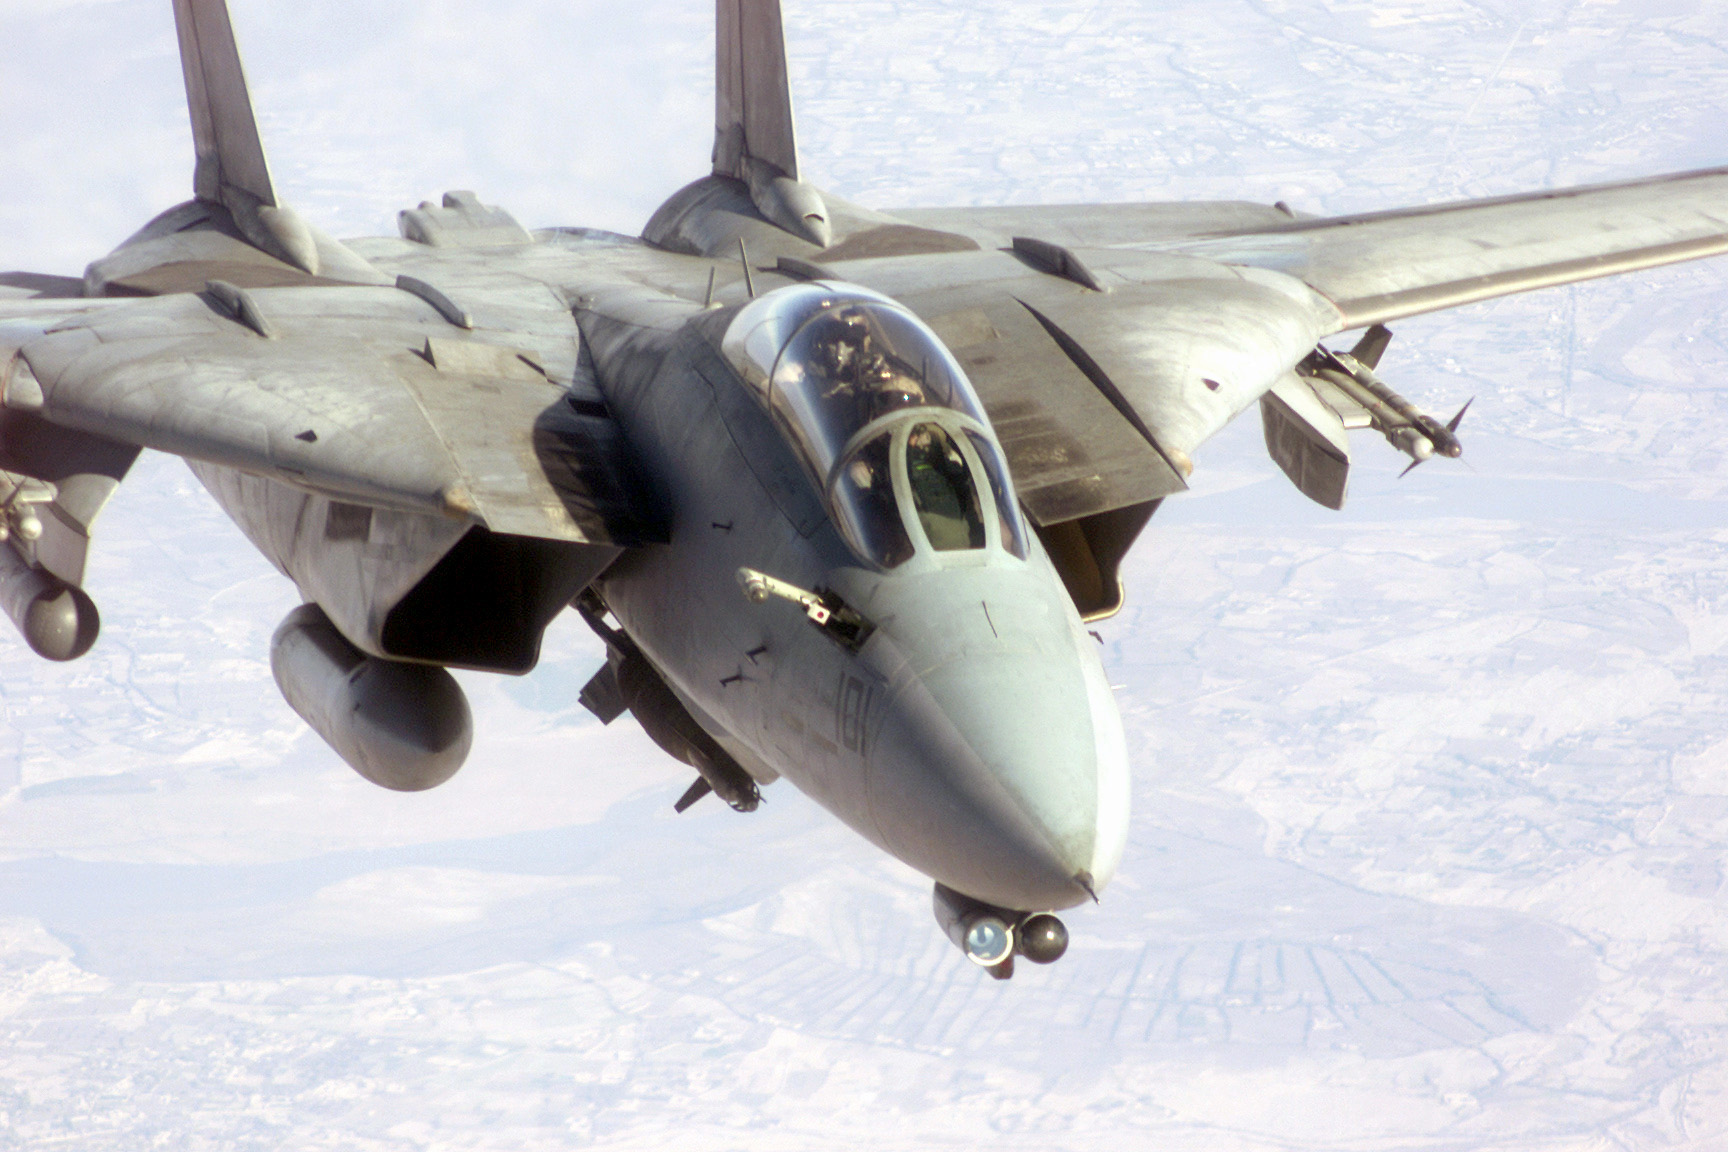 An F-14 preparing to refuel during operation Enduring Freedom.